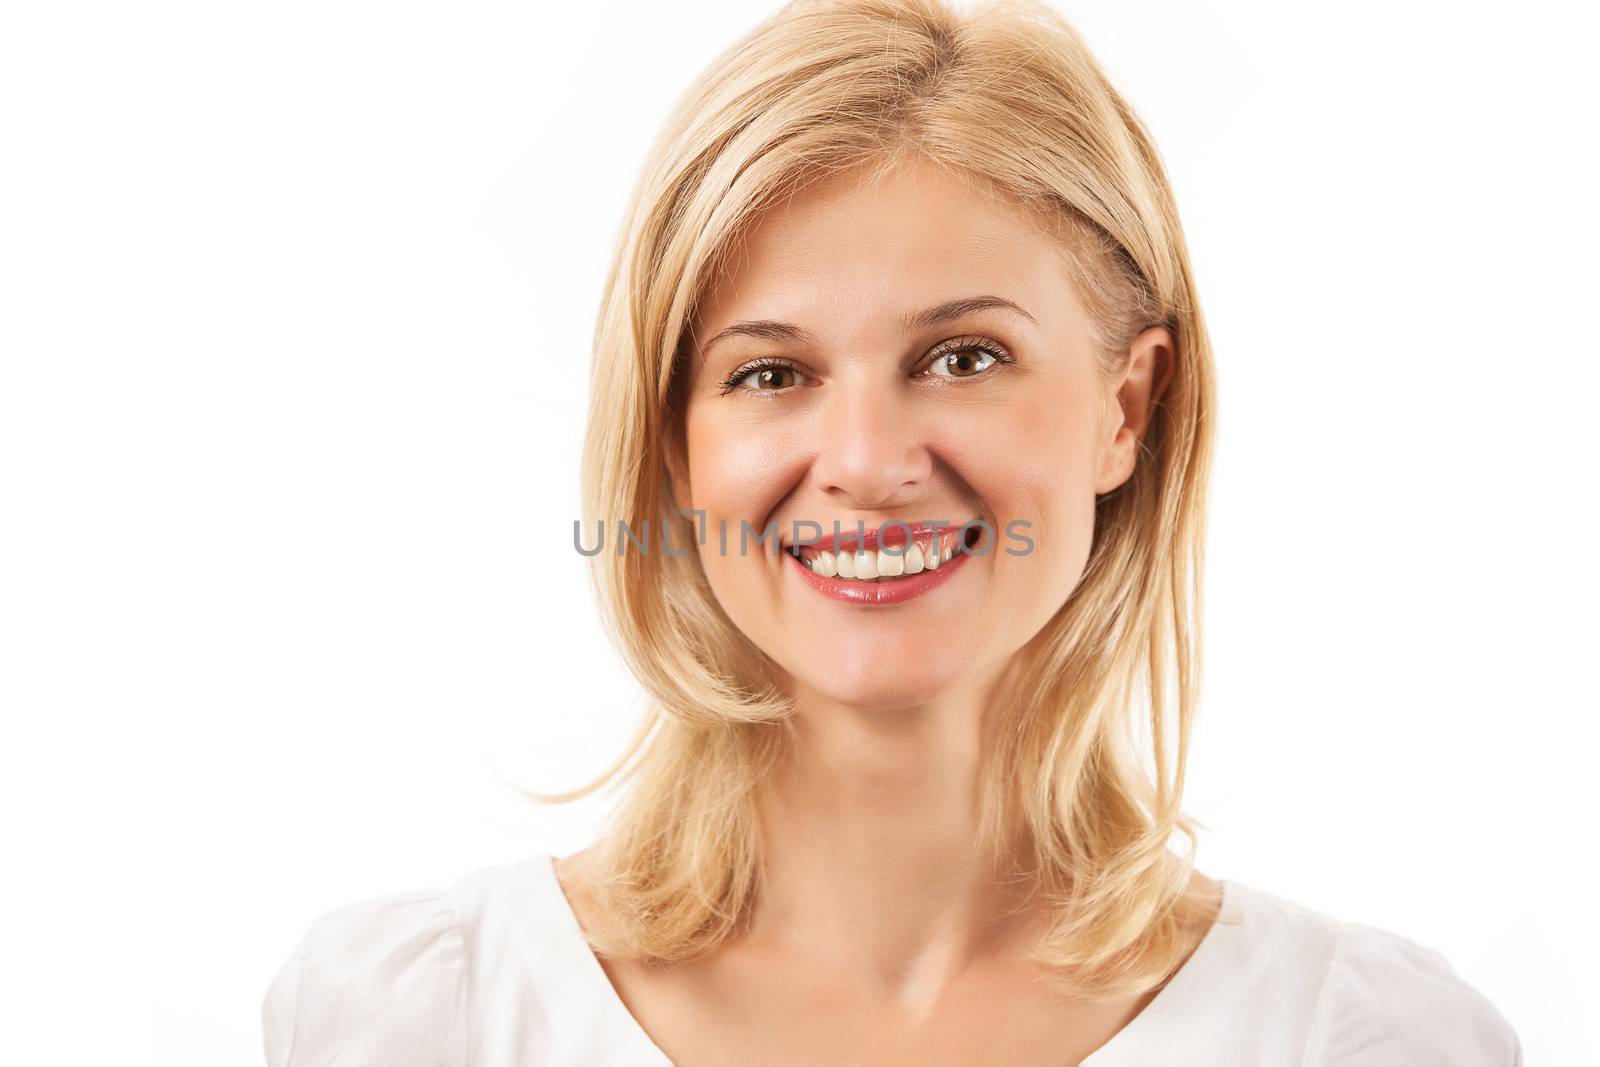 Happy young woman smiling over white background